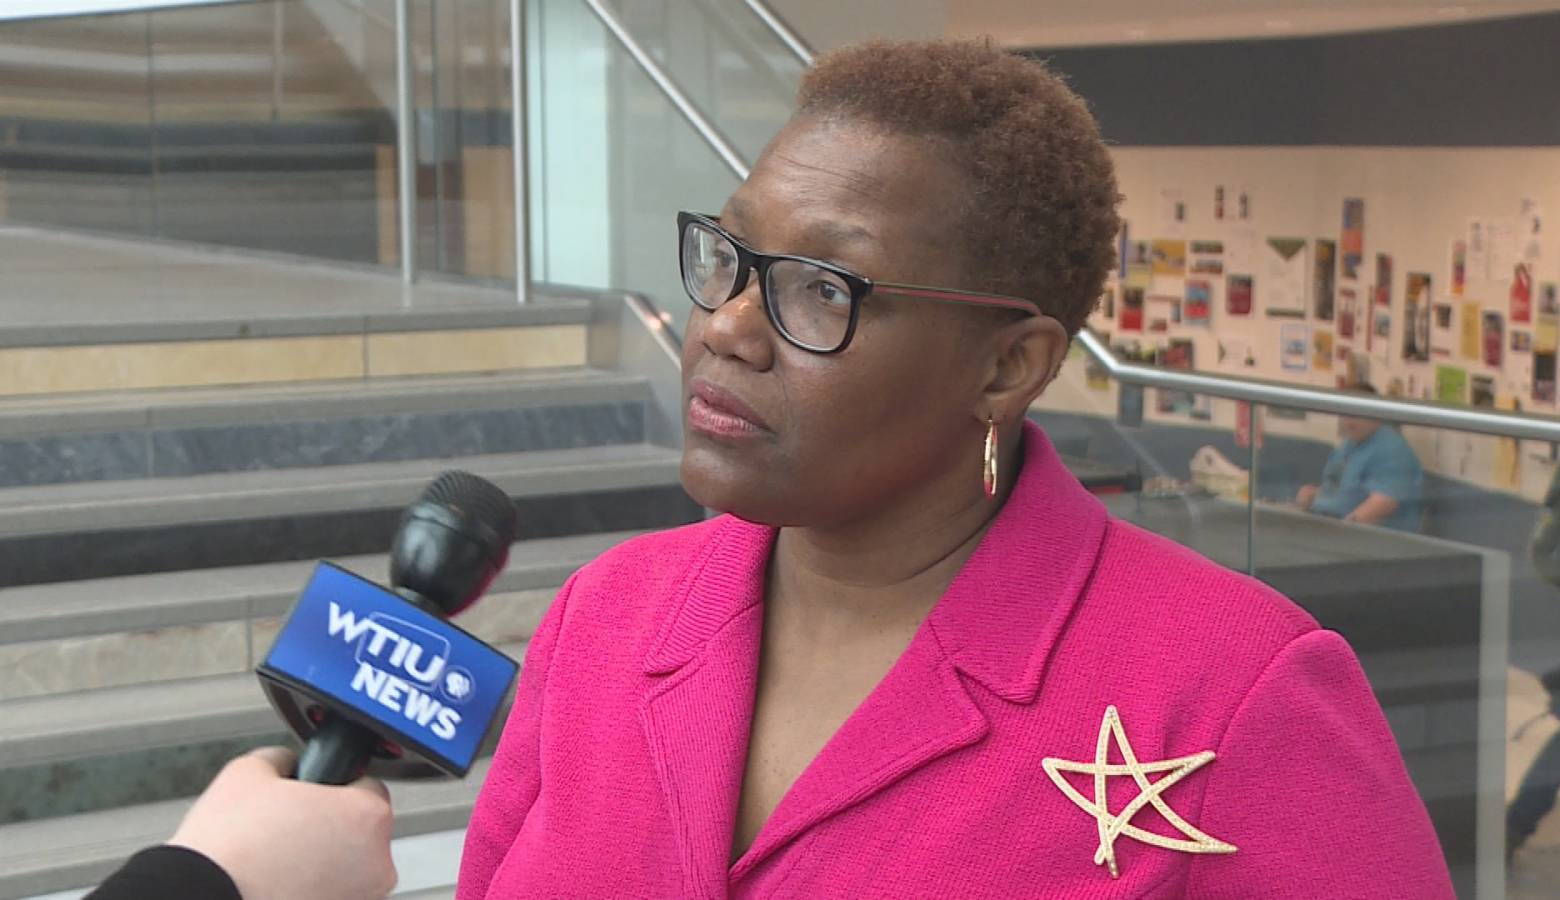 The mayor of Gary says lawmakers should let the current emergency management process function without further interference. (Steve Burns/WTIU)